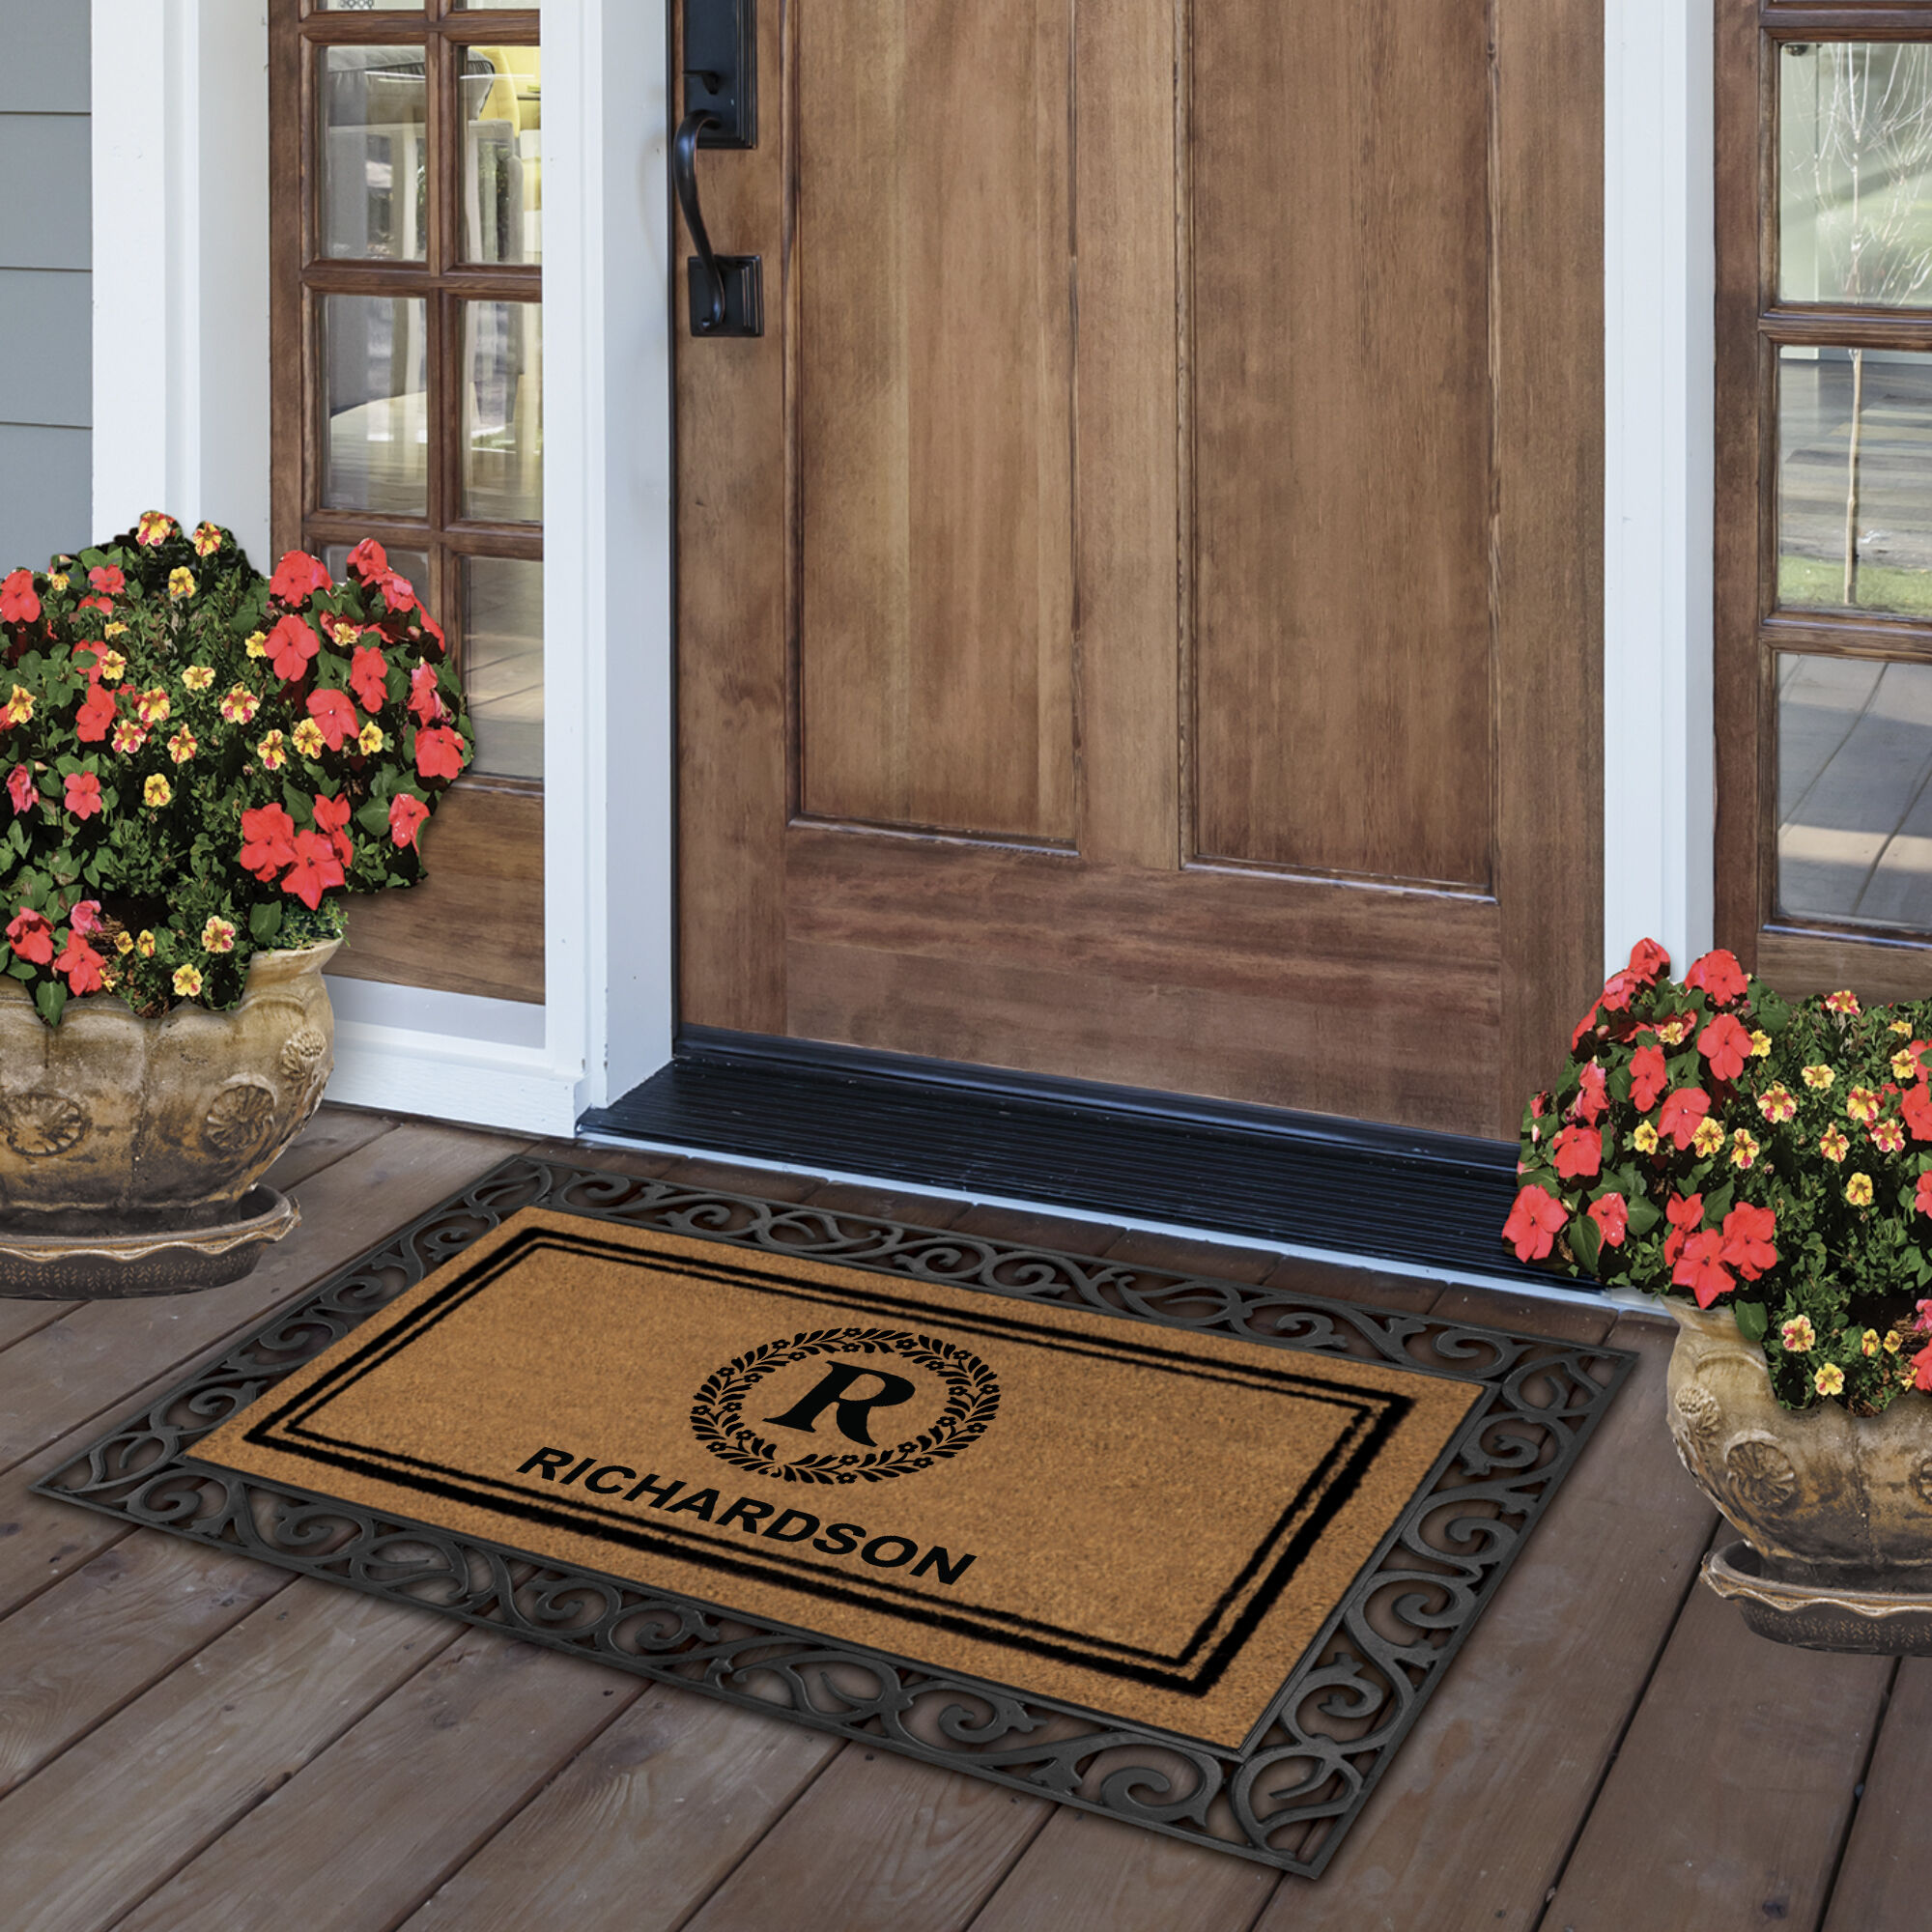 The Monogrammed Welcome Mat 6102 0012 b room